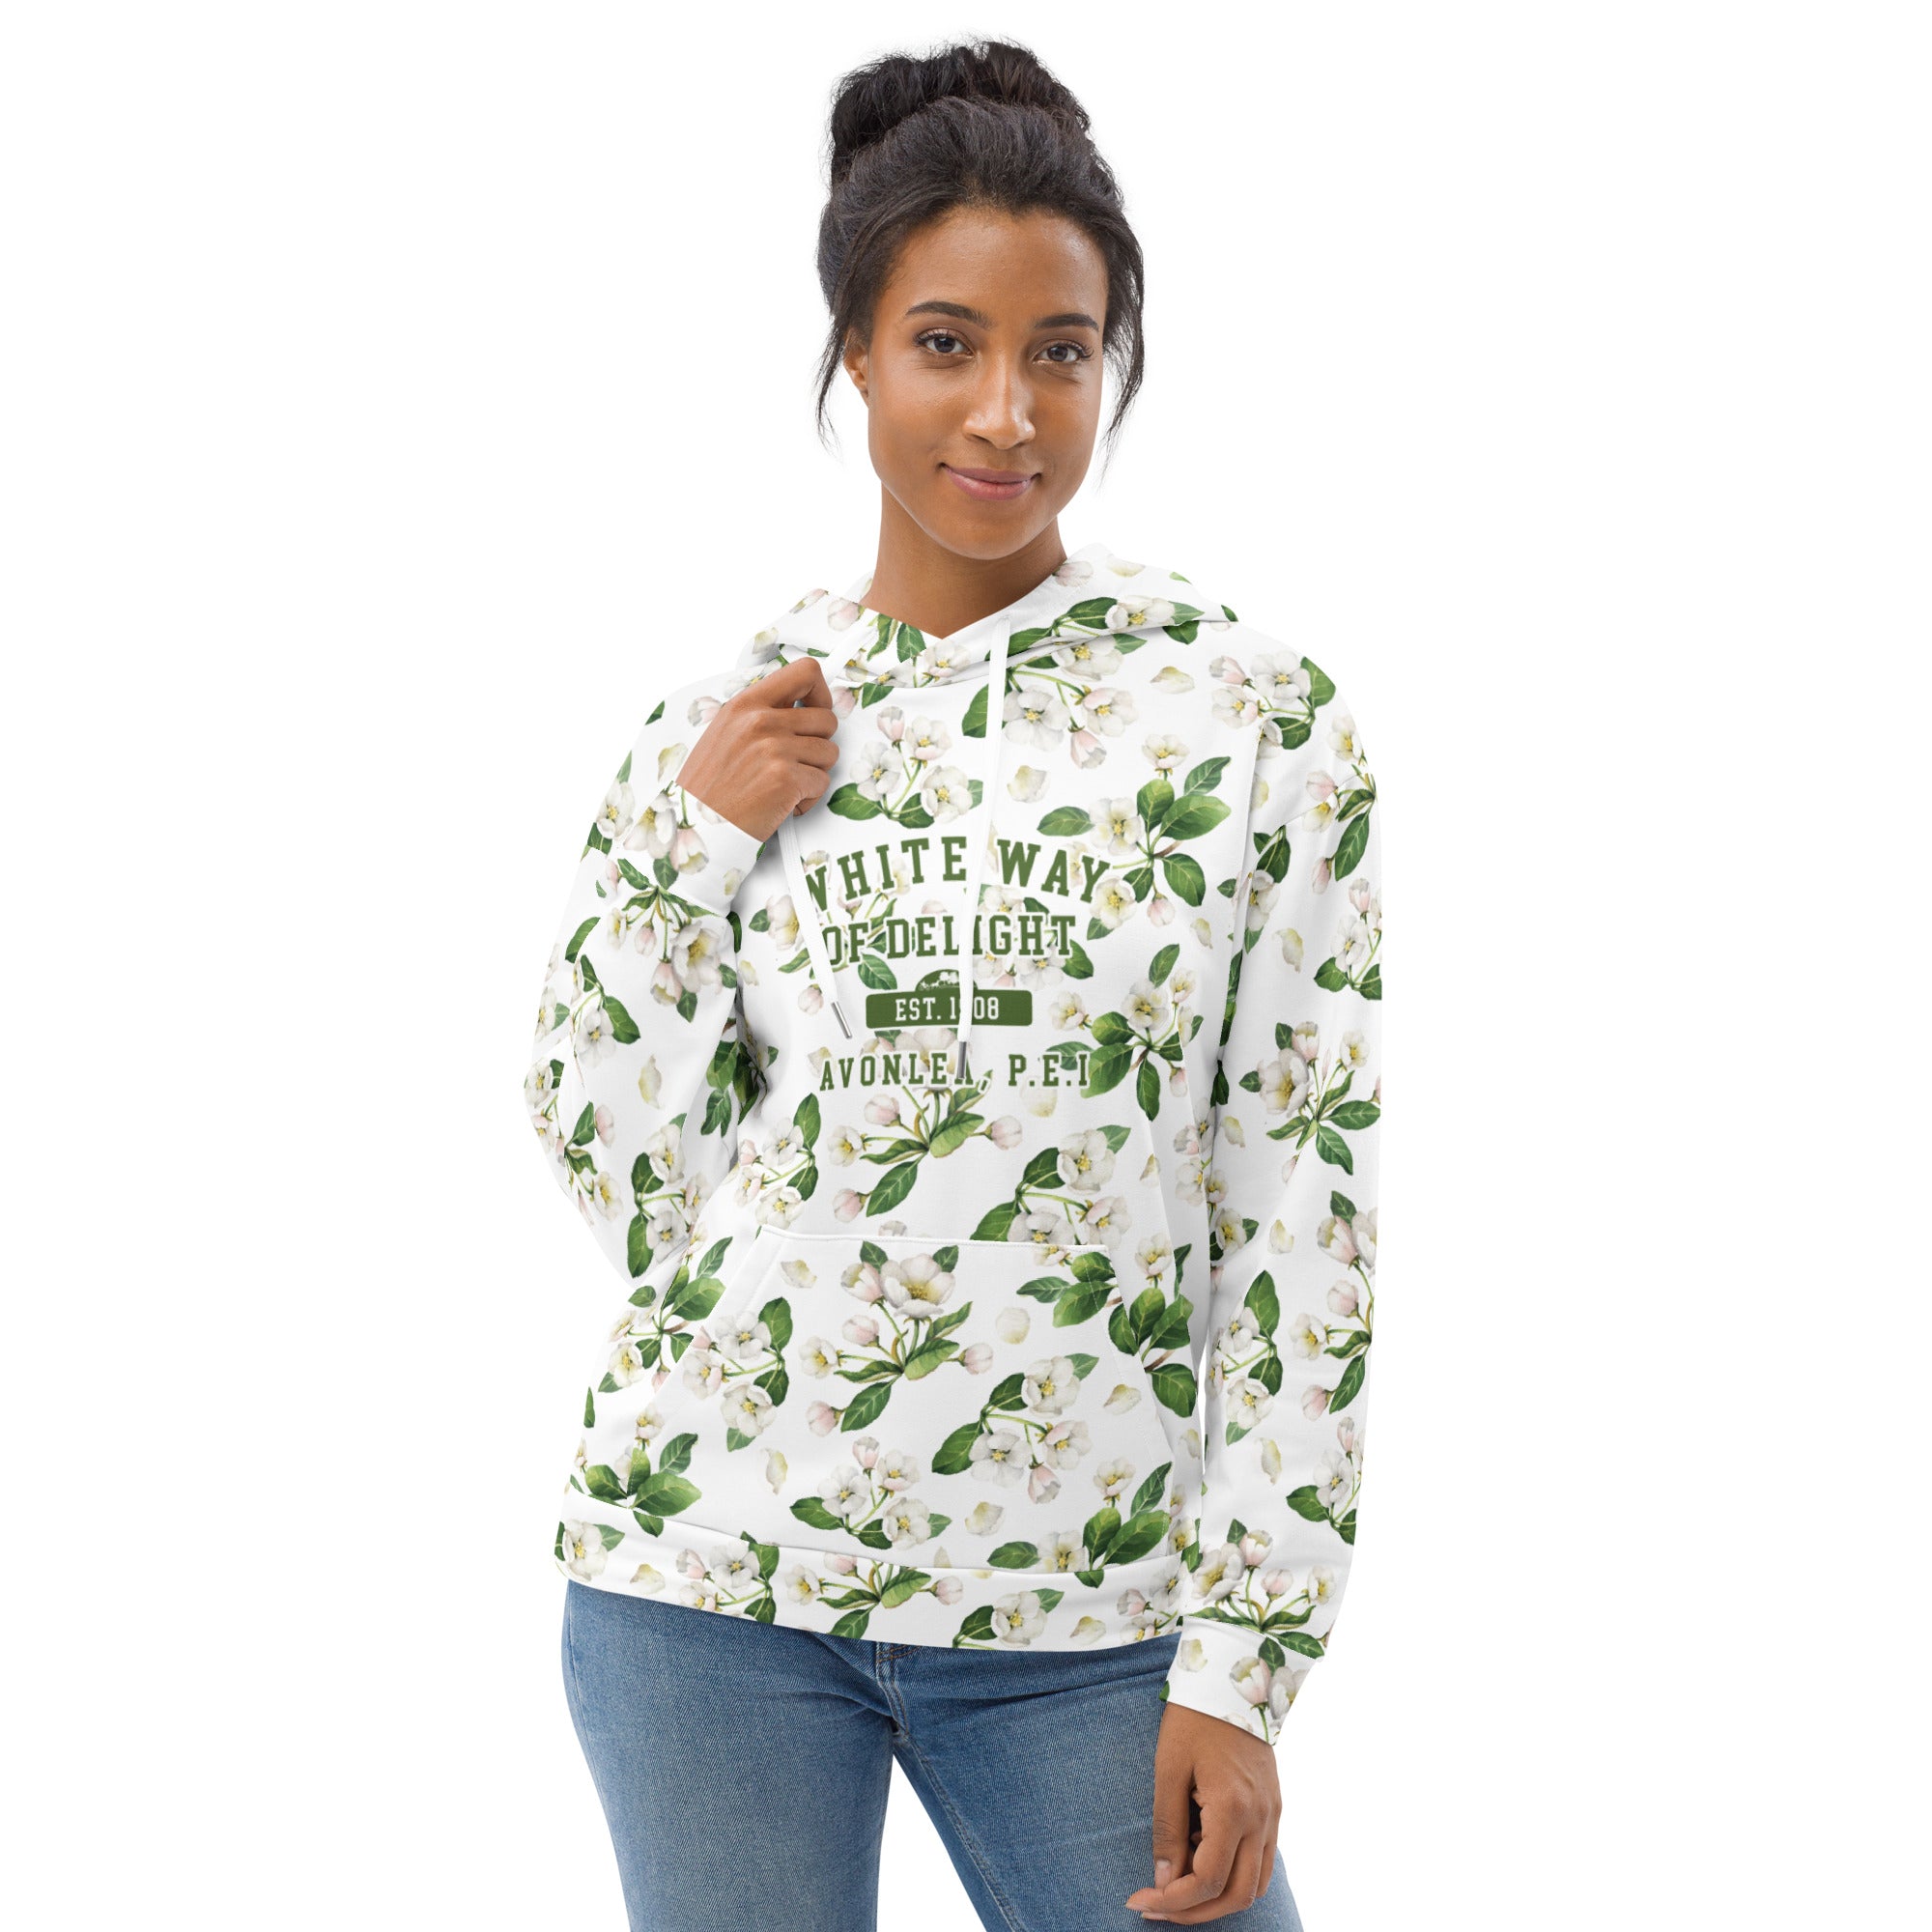 White Way of Delight Apple Blossom Hoodie